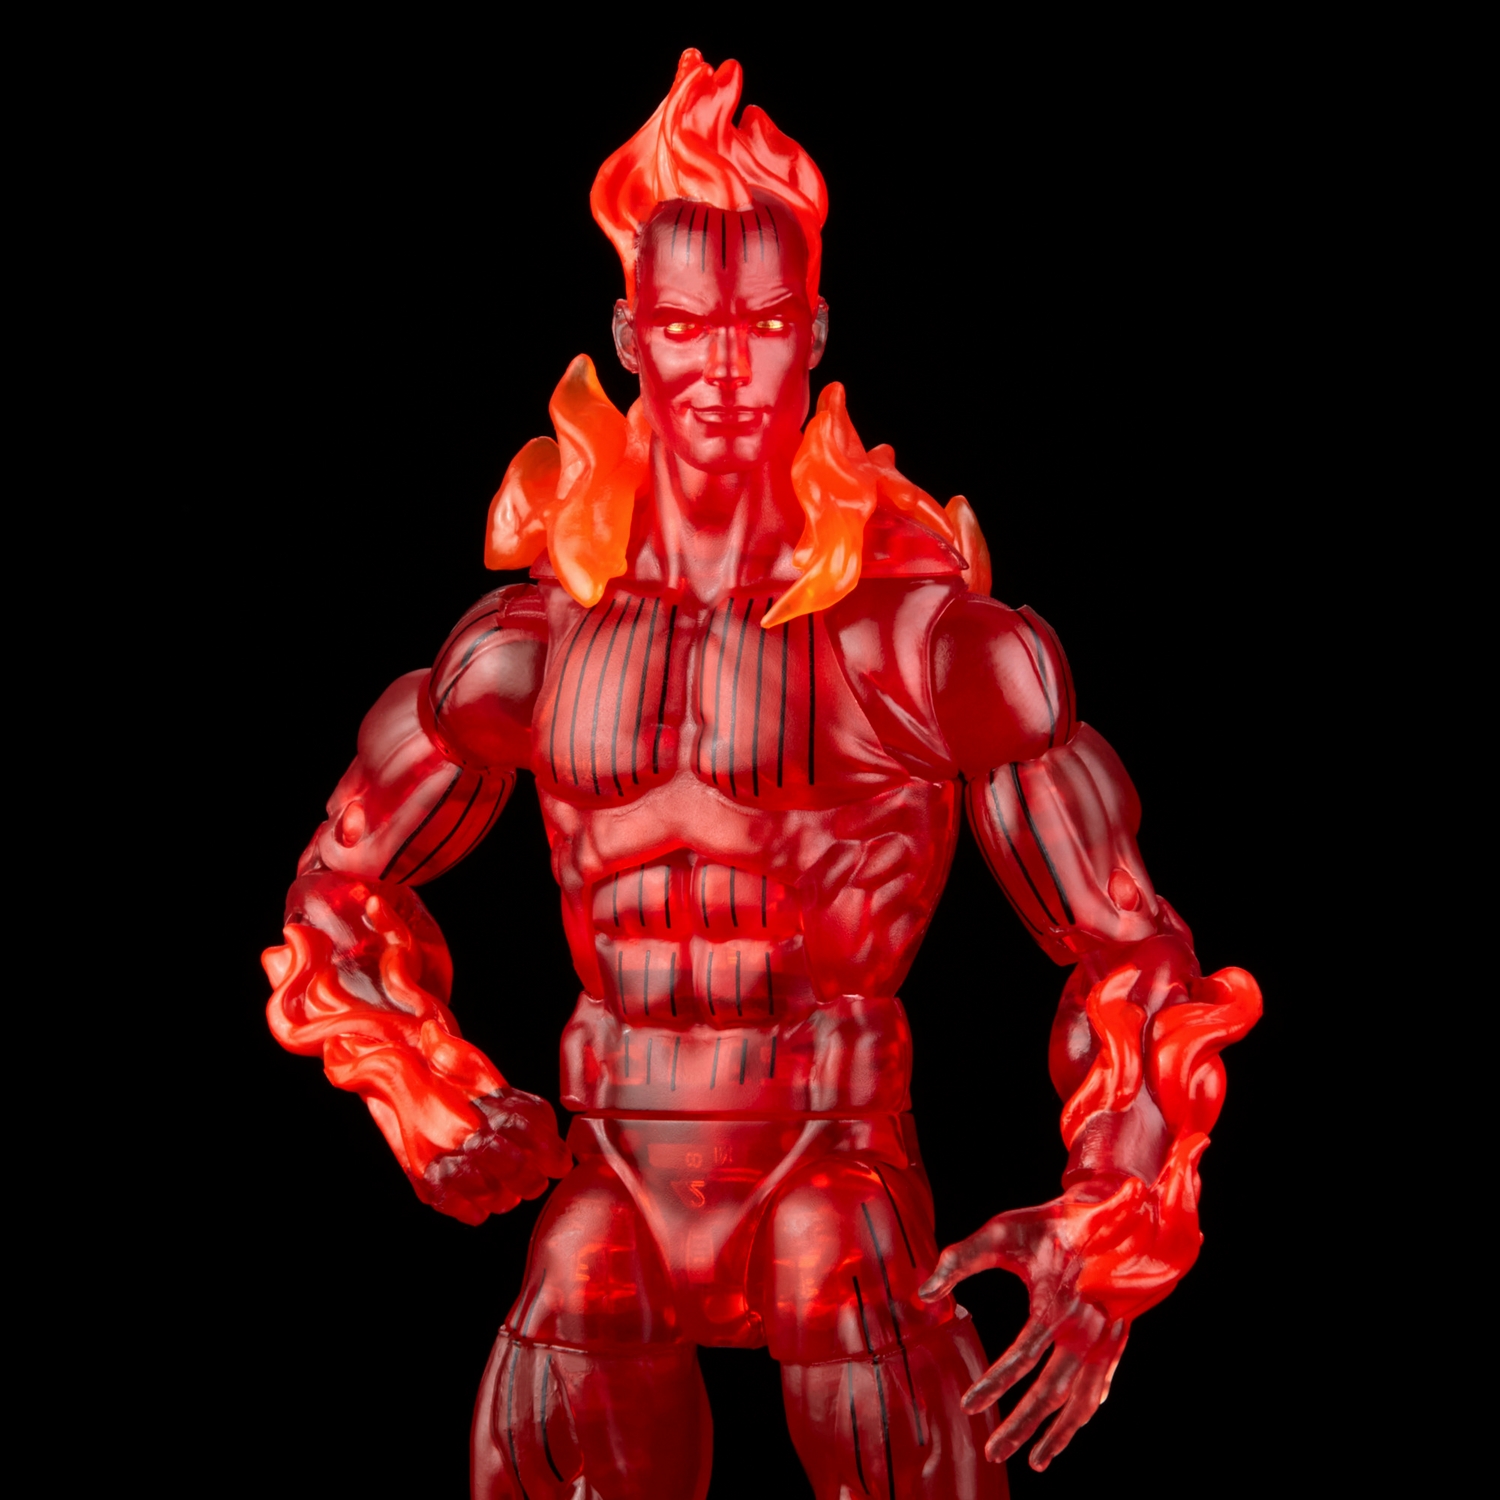 MARVEL LEGENDS SERIES 6-INCH RETRO FANTASTIC FOUR THE HUMAN TORCH Figure_oop 6.jpg